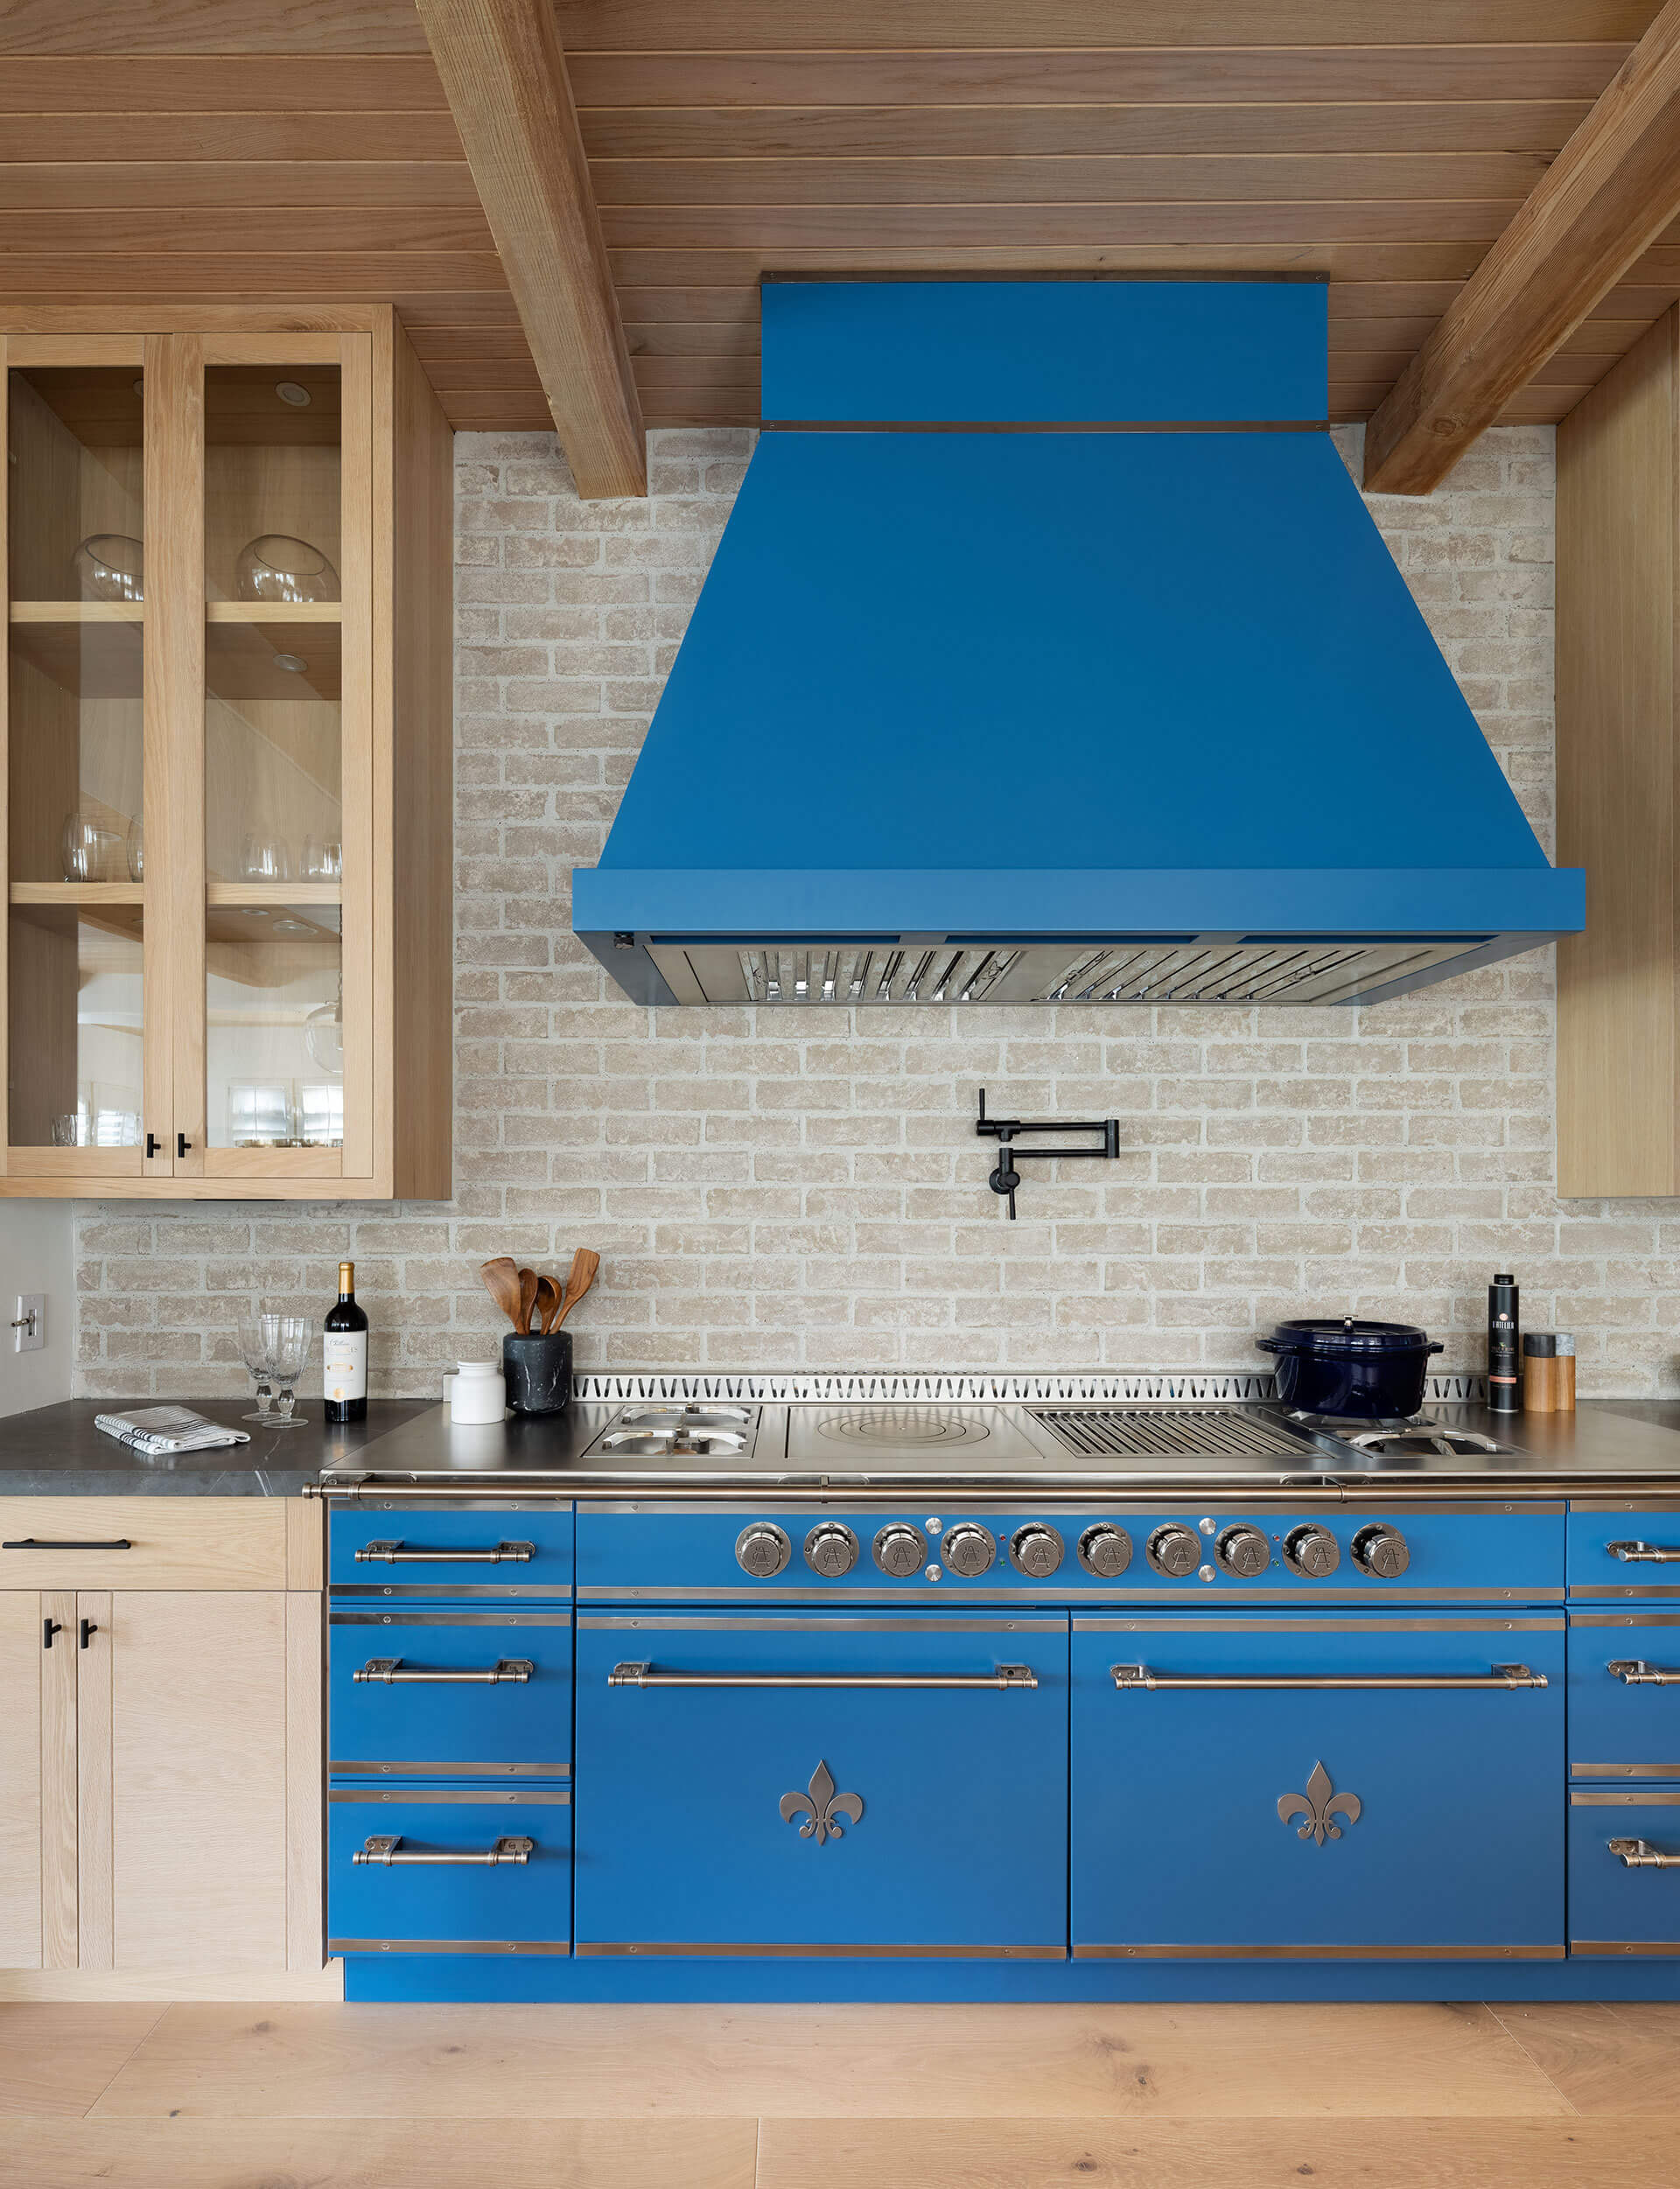 Wooden hanging custom kitchen cabinets and blue luxury kitchen hood attached to wooden ceiling